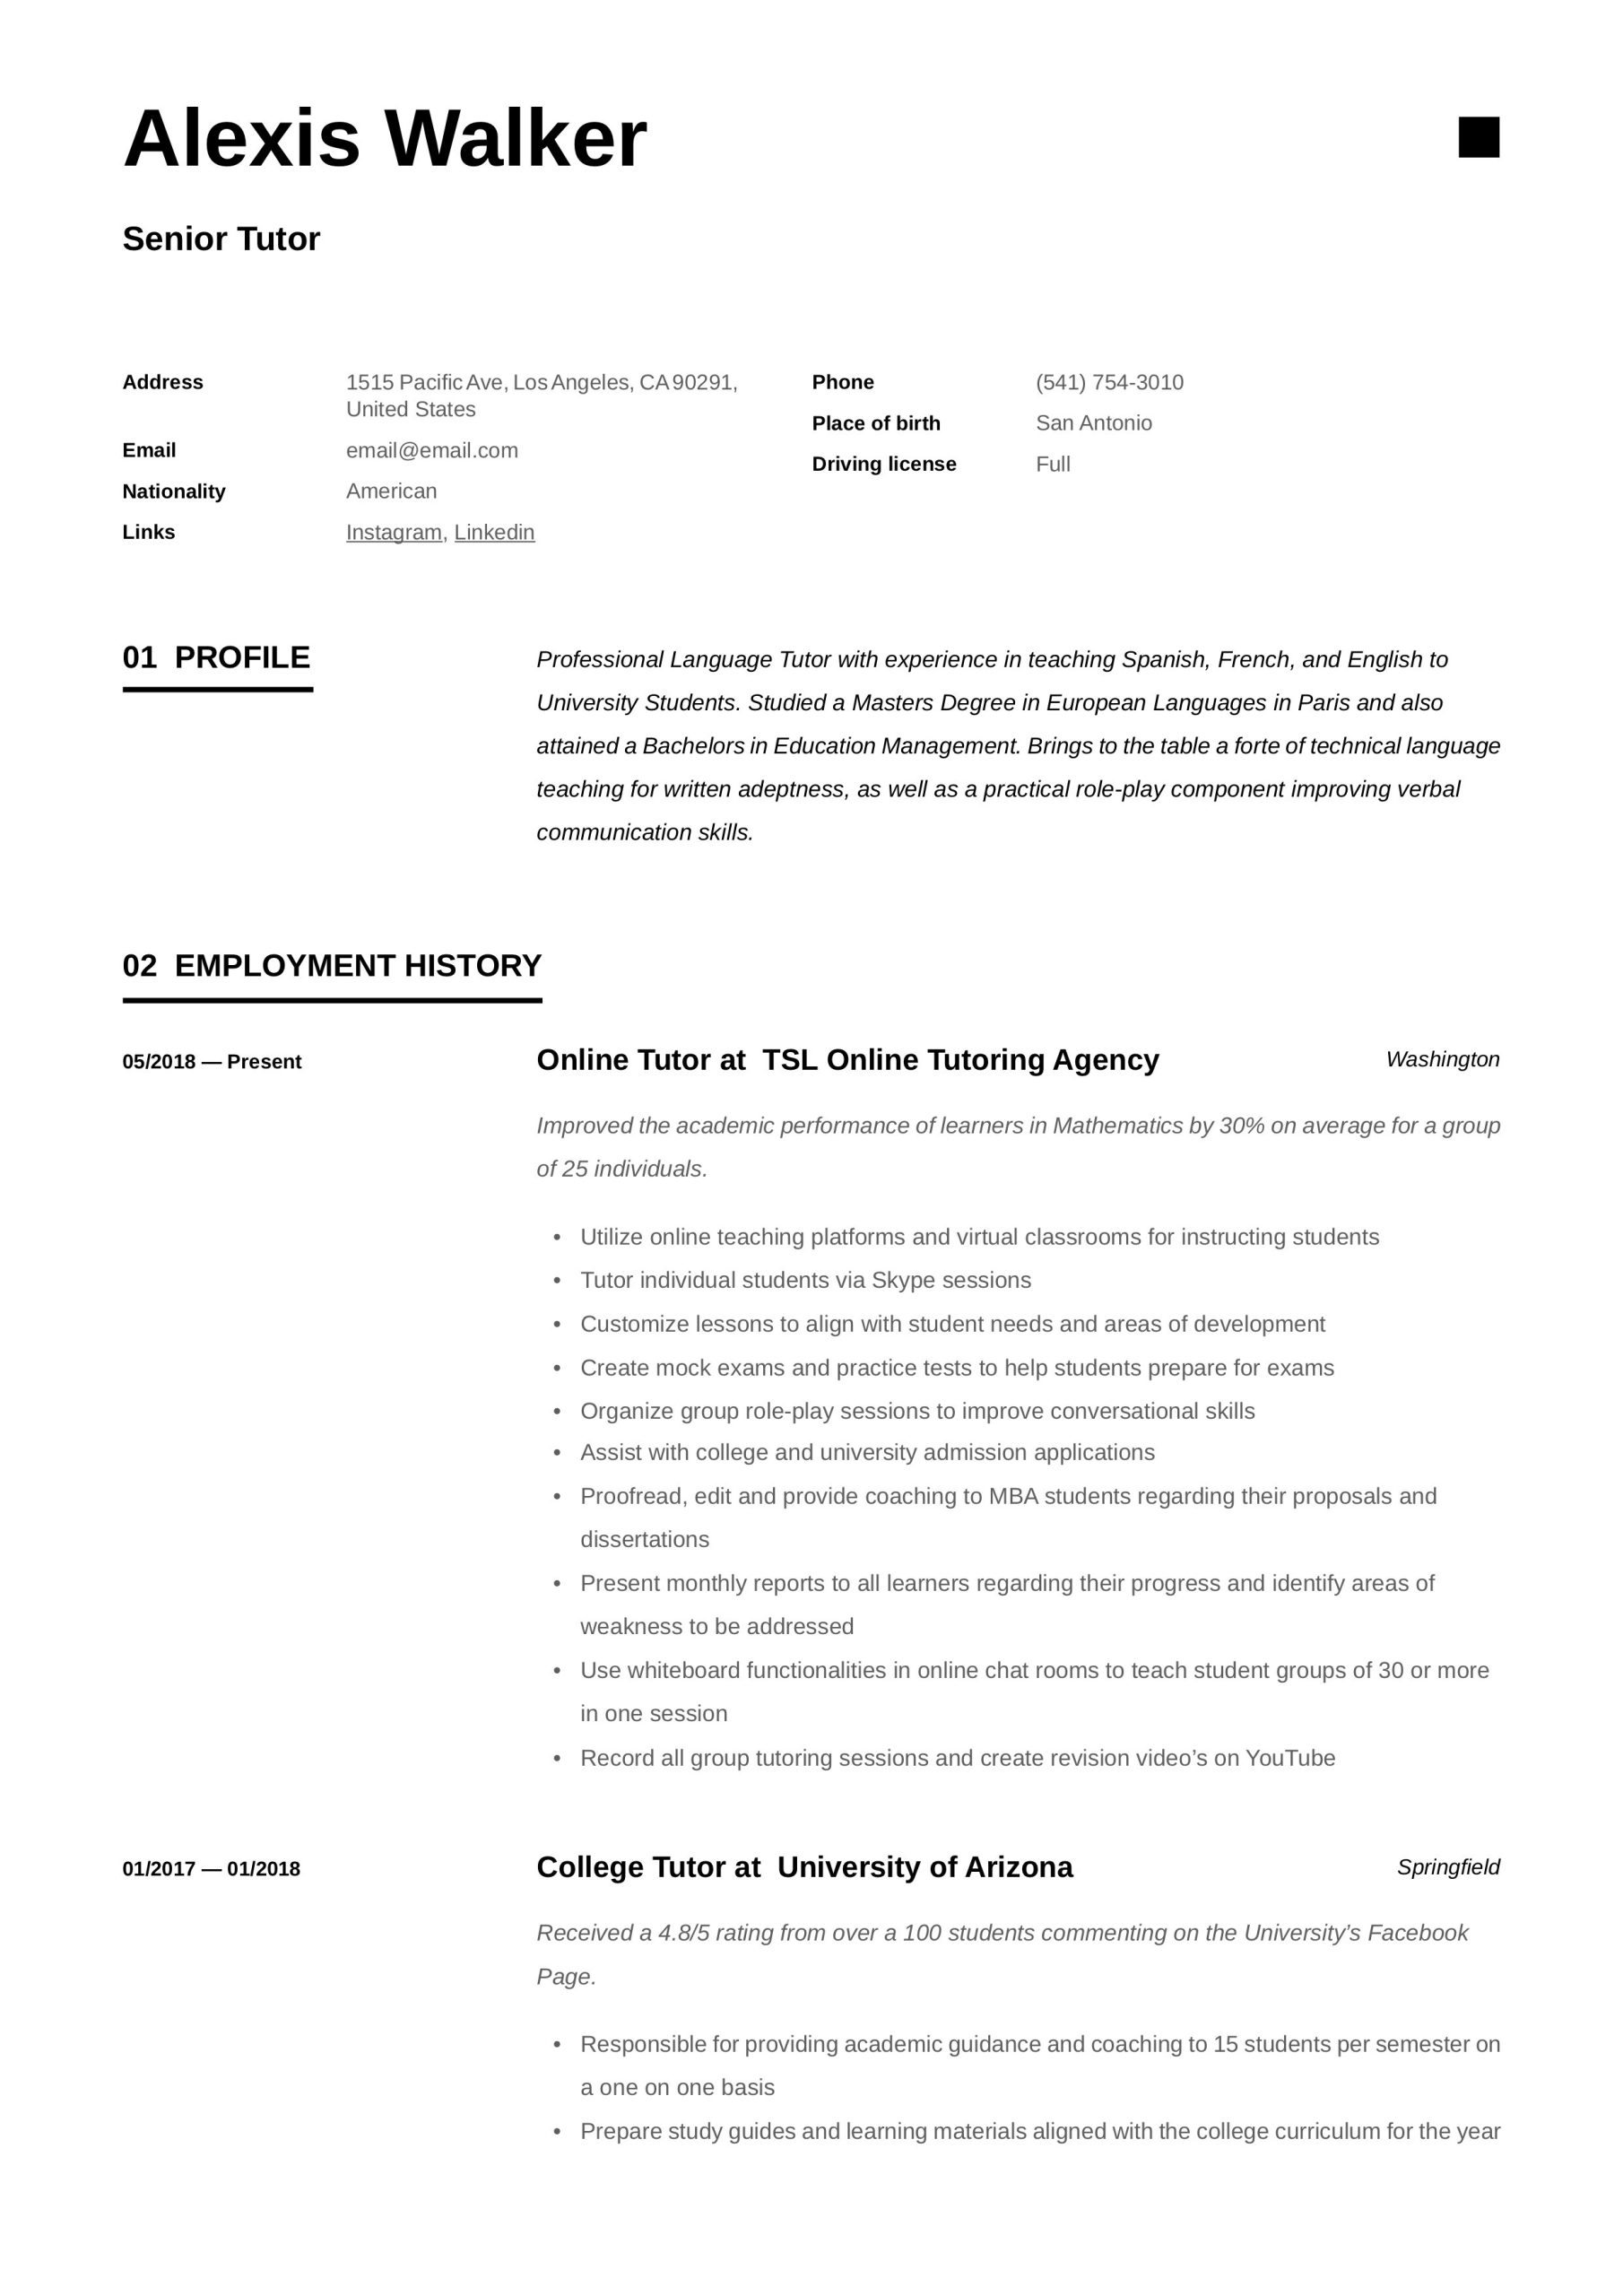 Private Tutor Sample Resume Core Qualifications Tutor Resume & Writing Guide  12 Resume Examples 2019